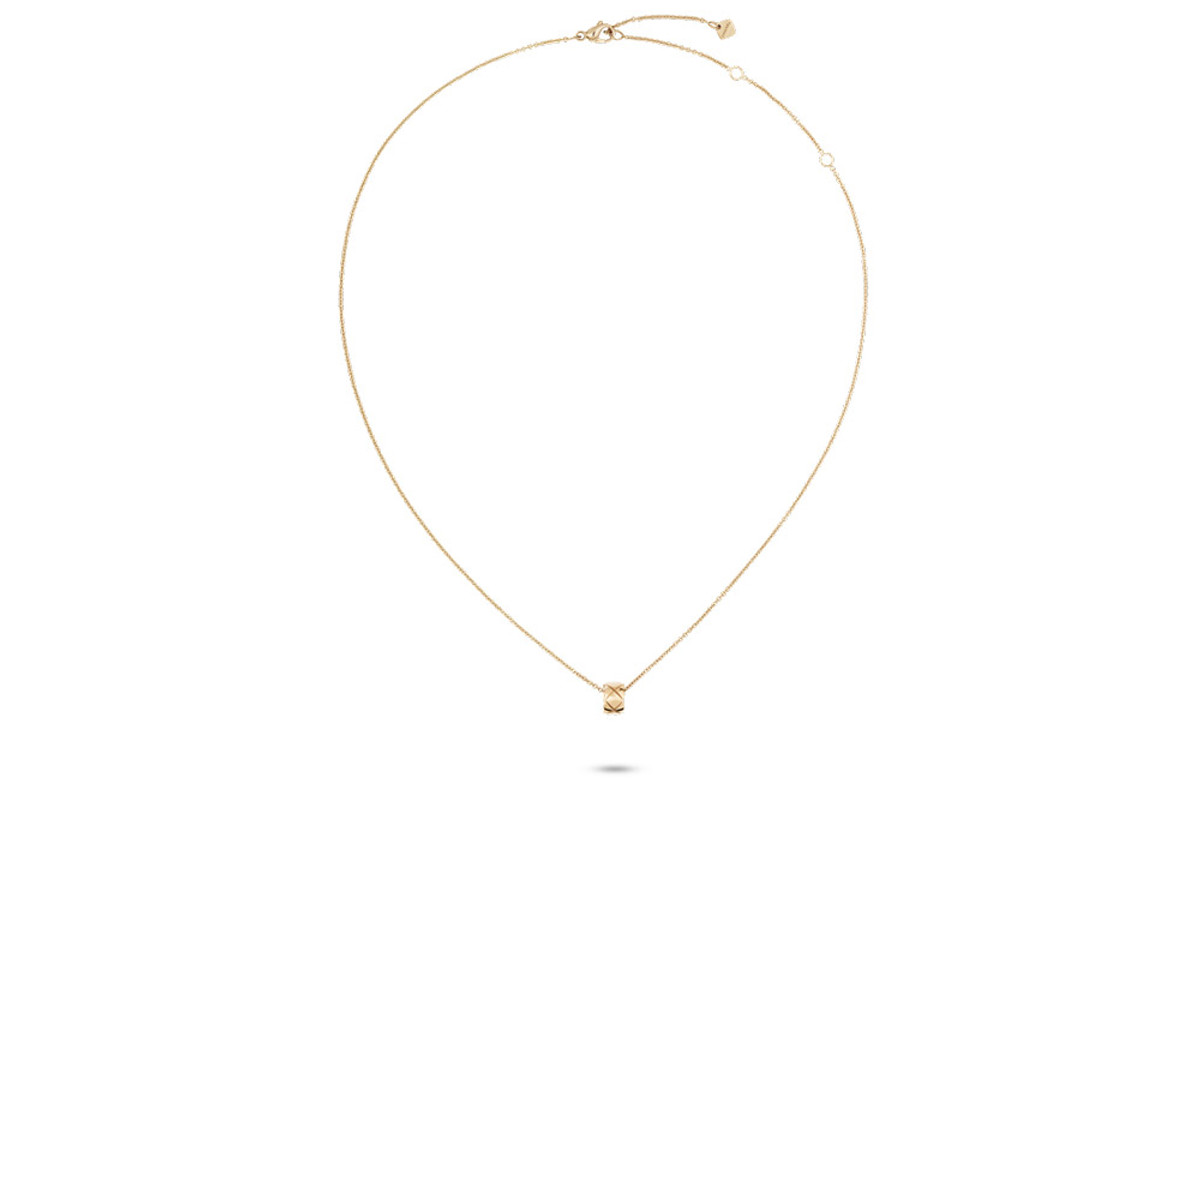 CHANEL COCO CRUSH Necklace-48859 - Hyde Park Jewelers